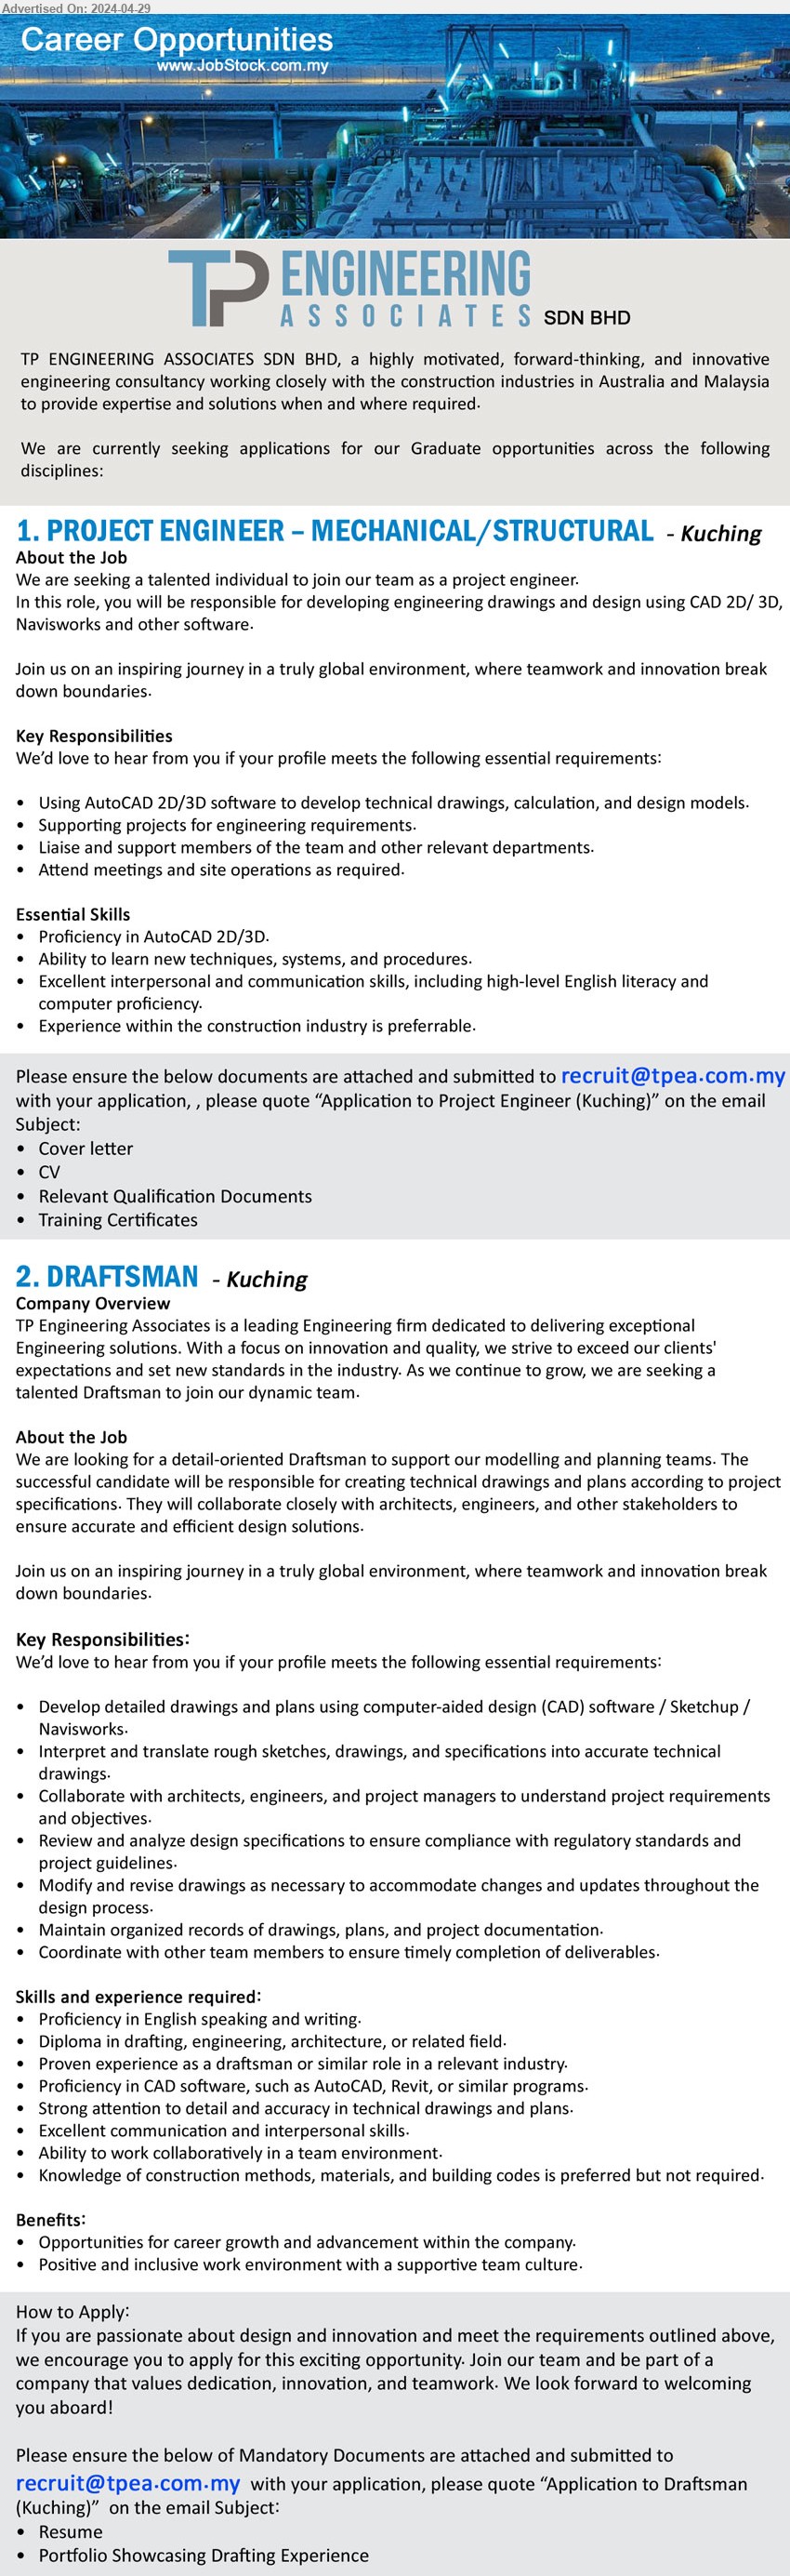 TP ENGINEERING ASSOCIATES SDN BHD - 1. PROJECT ENGINEER – MECHANICAL/STRUCTURAL (Kuching), Proficiency in AutoCAD 2D/3D, Ability to learn new techniques, systems, and procedures.,...
2. DRAFTSMAN (Kuching), Diploma in Drafting, Engineering, Architecture, Proficiency in CAD software, such as AutoCAD, Revit, or similar programs.,...
Email resume to ...